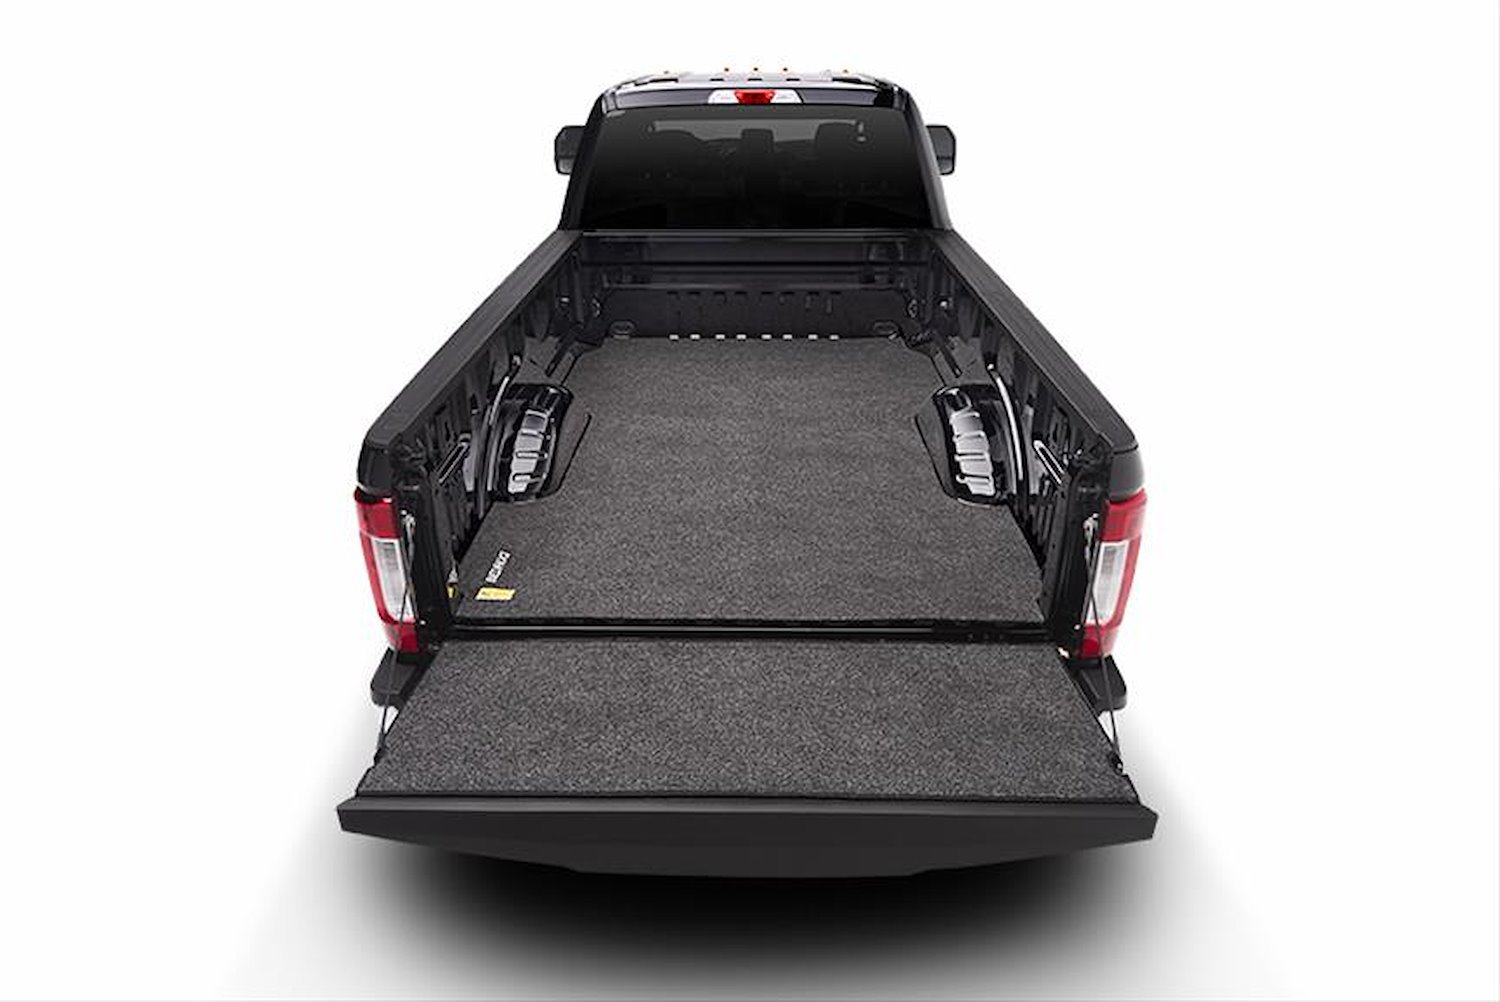 BMQ17LBS BEDMAT FOR SPRAY-IN OR NO BED LINER 17+ FORD SUPERDUTY 8.0' LONG BED